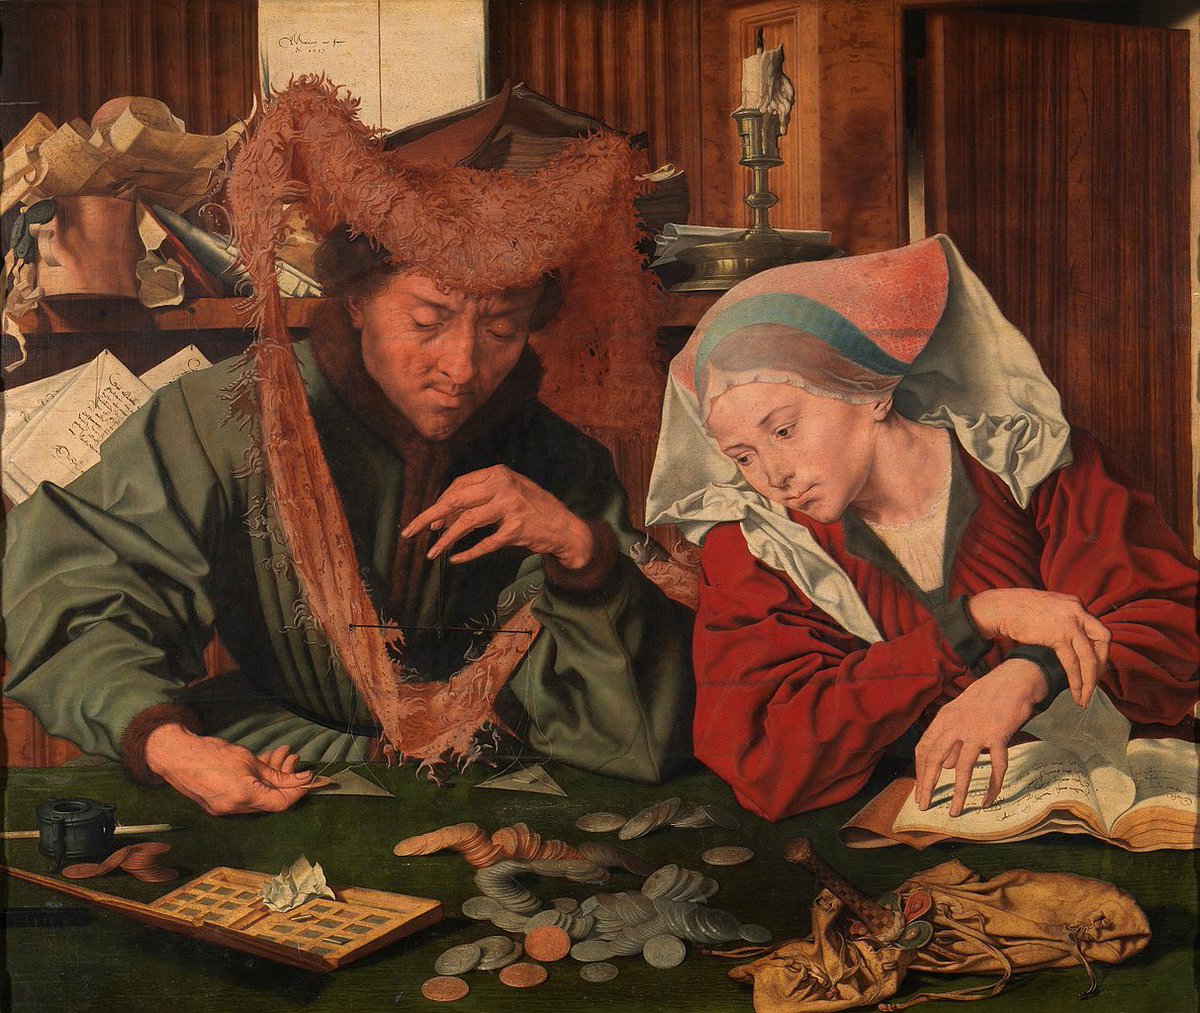 Today's artist w/out a (known) birthday: Marinus van Reymerswaele. Painted only about 4 subjects but painted them well and often! Here, moneychanger & his wife, 1539, from the Prado.